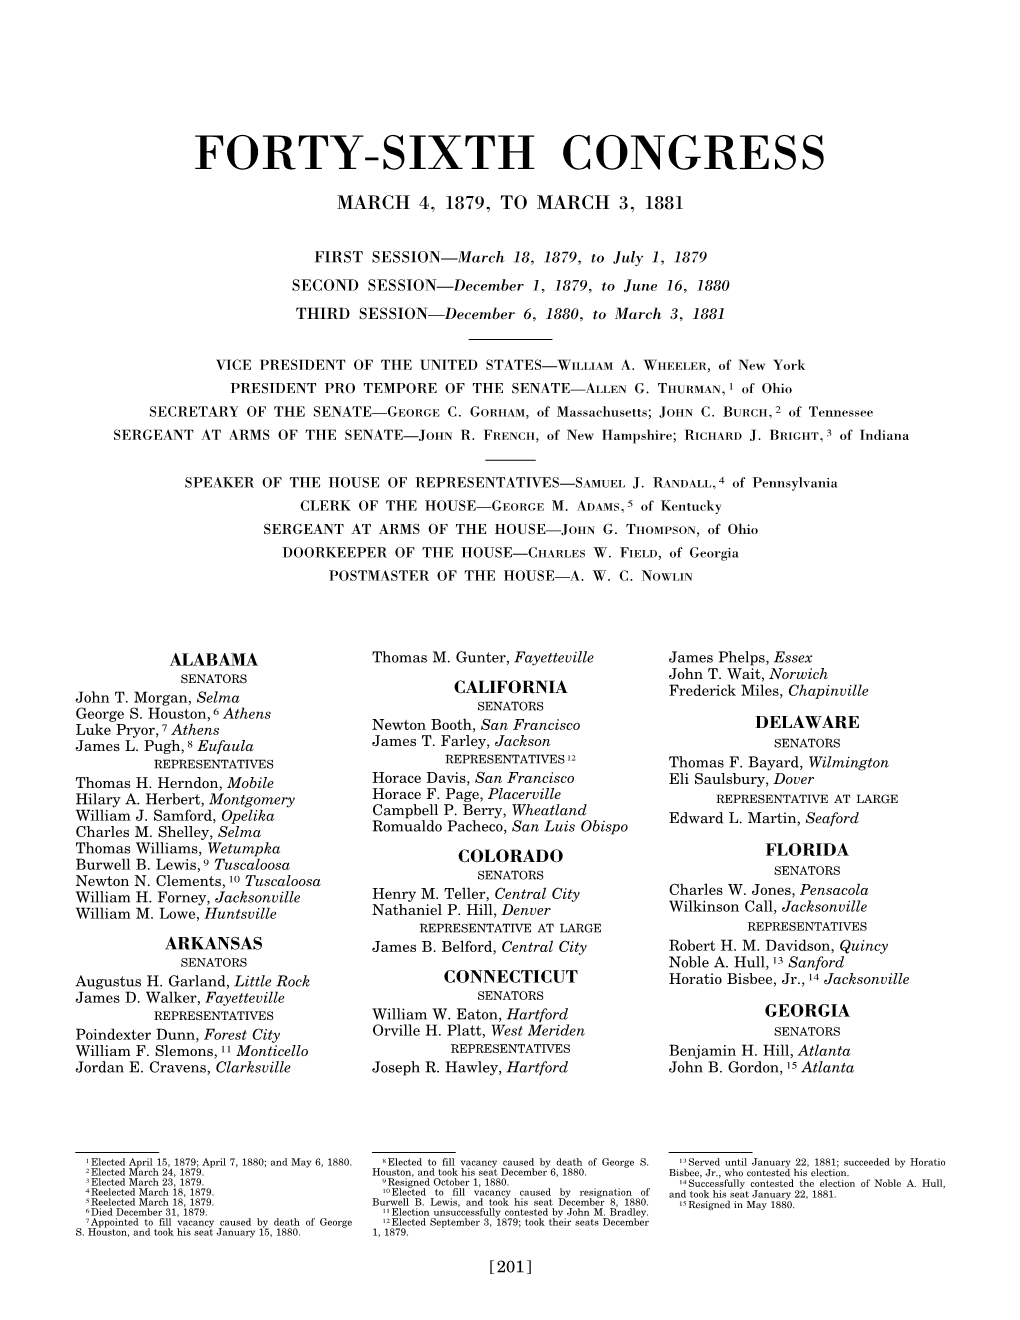 Forty-Sixth Congress March 4, 1879, to March 3, 1881